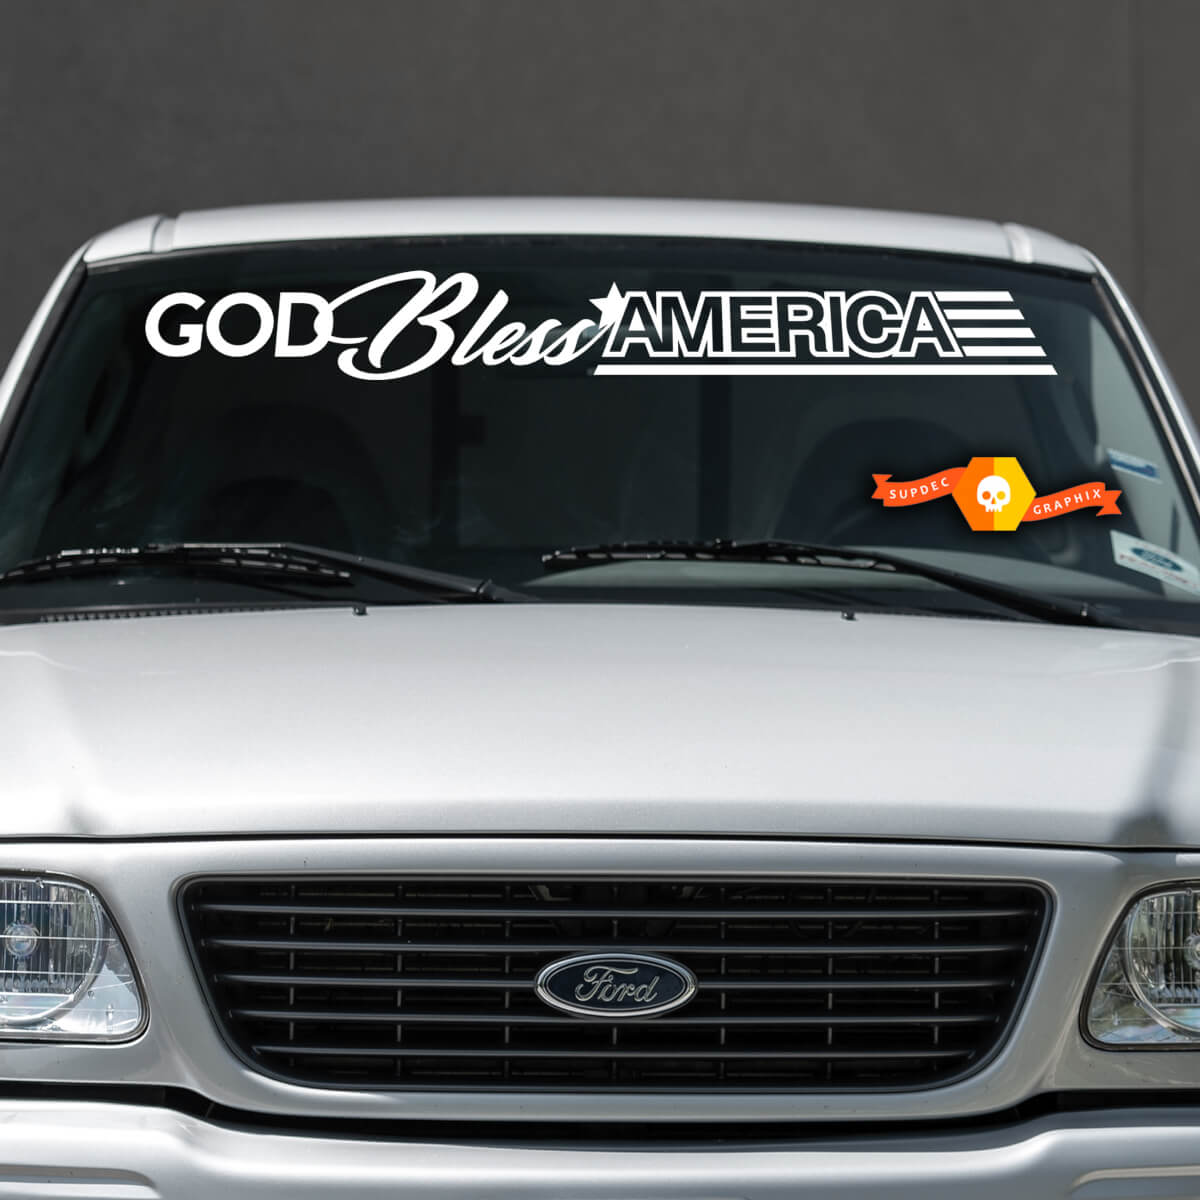 https://de.supdec.com/images/12382_1_god_bless_america_nissan_ford_chevrolet_jeep_car_windshield_decal_sticker_graphics_fits_to_any_models__.jpg